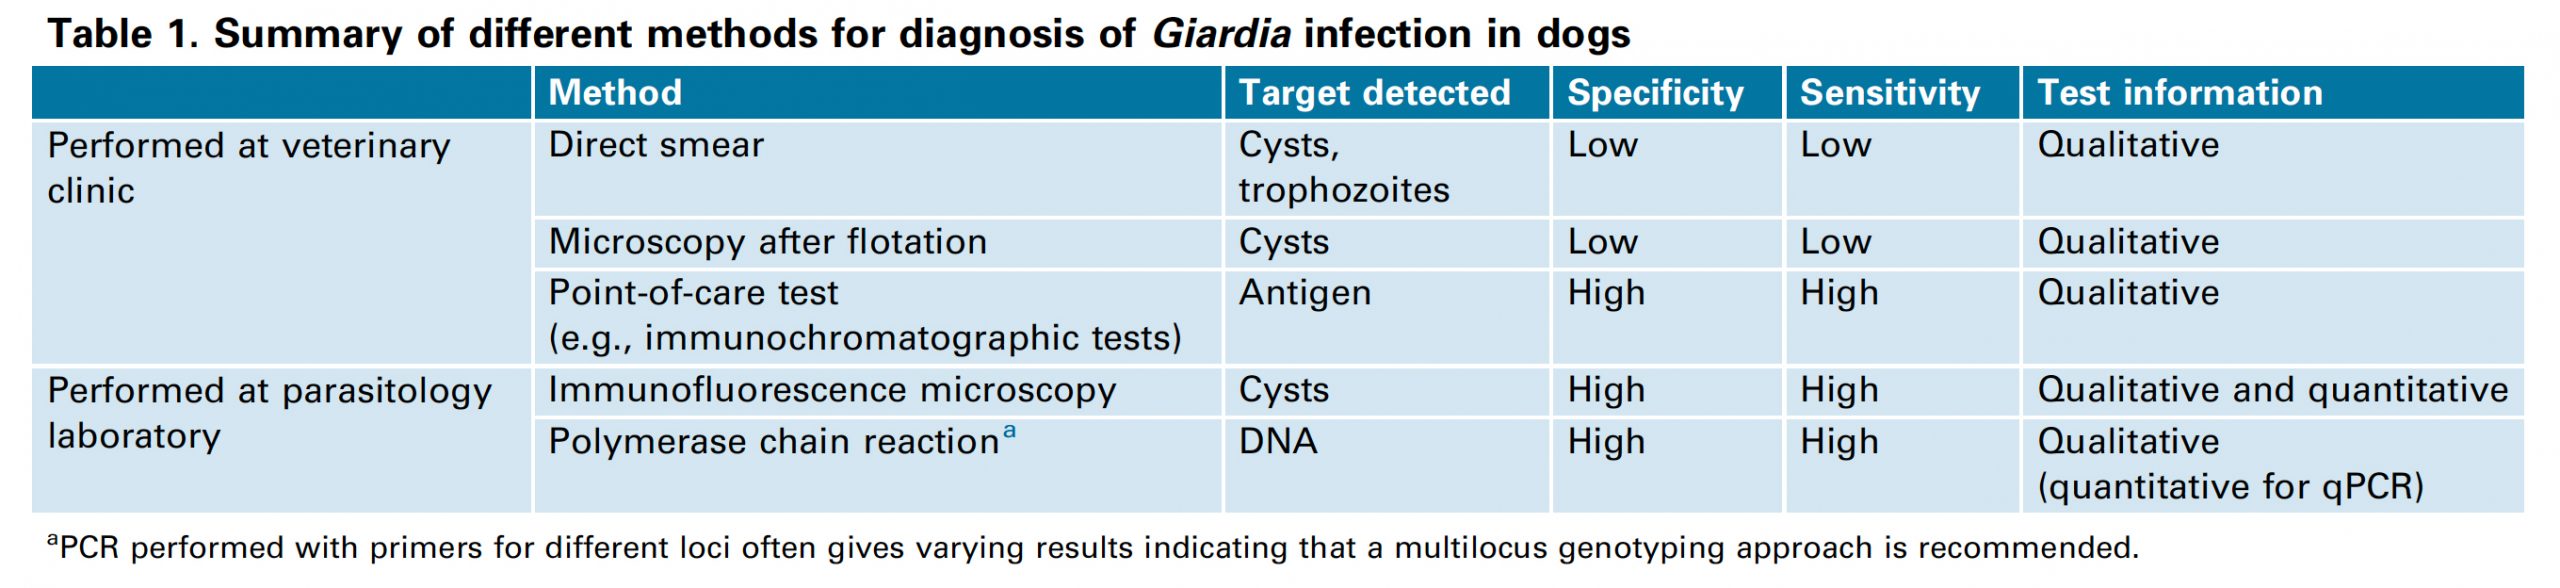 Giardia Diagnostic Tests: Direct smear, microscopy after flotation, point of care test, immunofluorescence microscopy, and PCF